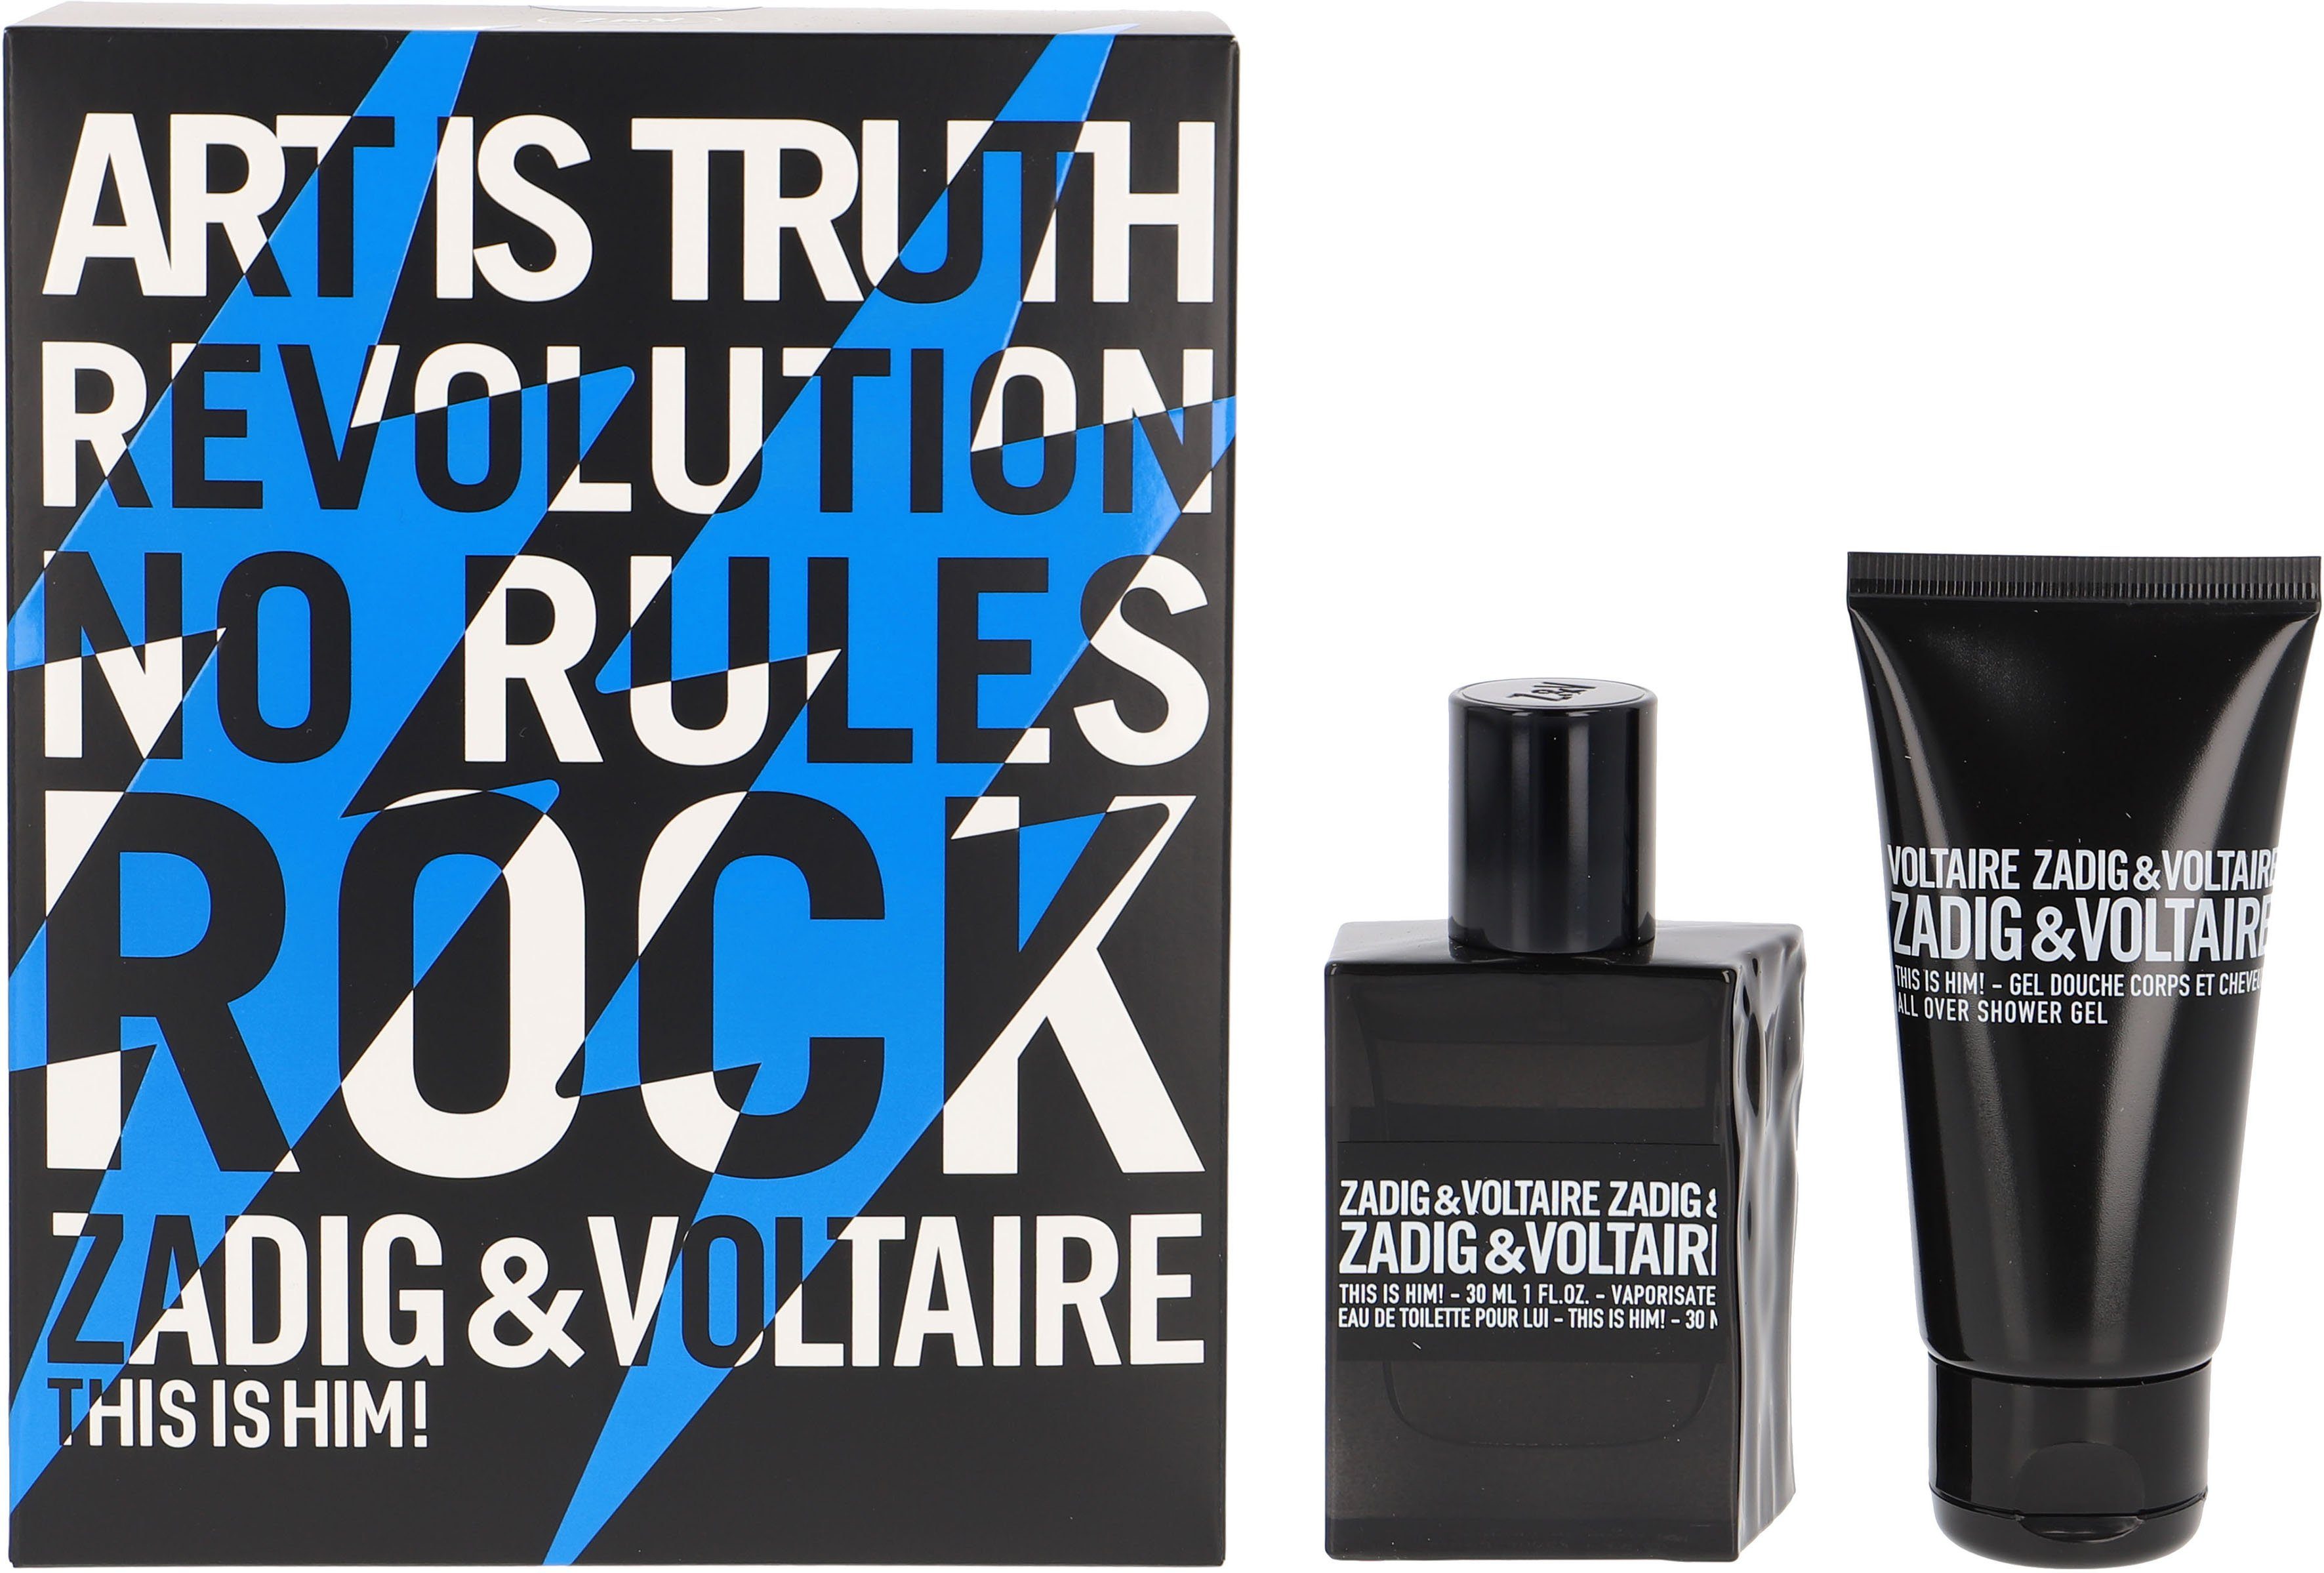 ZADIG This VOLTAIRE Duft-Set Him!, 2-tlg. is &